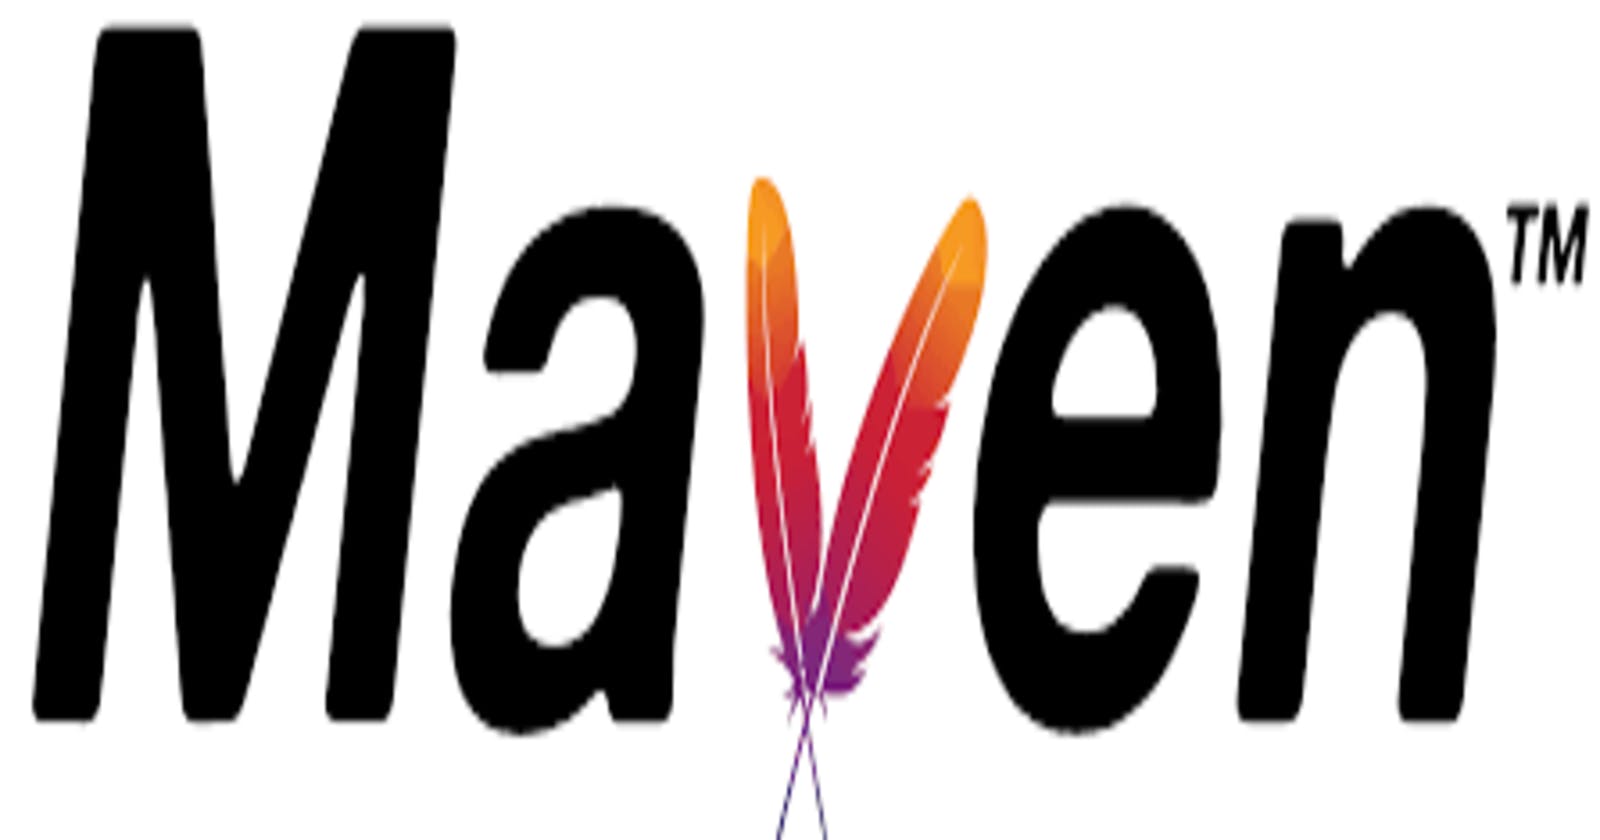 Maven: "Maven is the Ultimate Tool for Java Application Development"